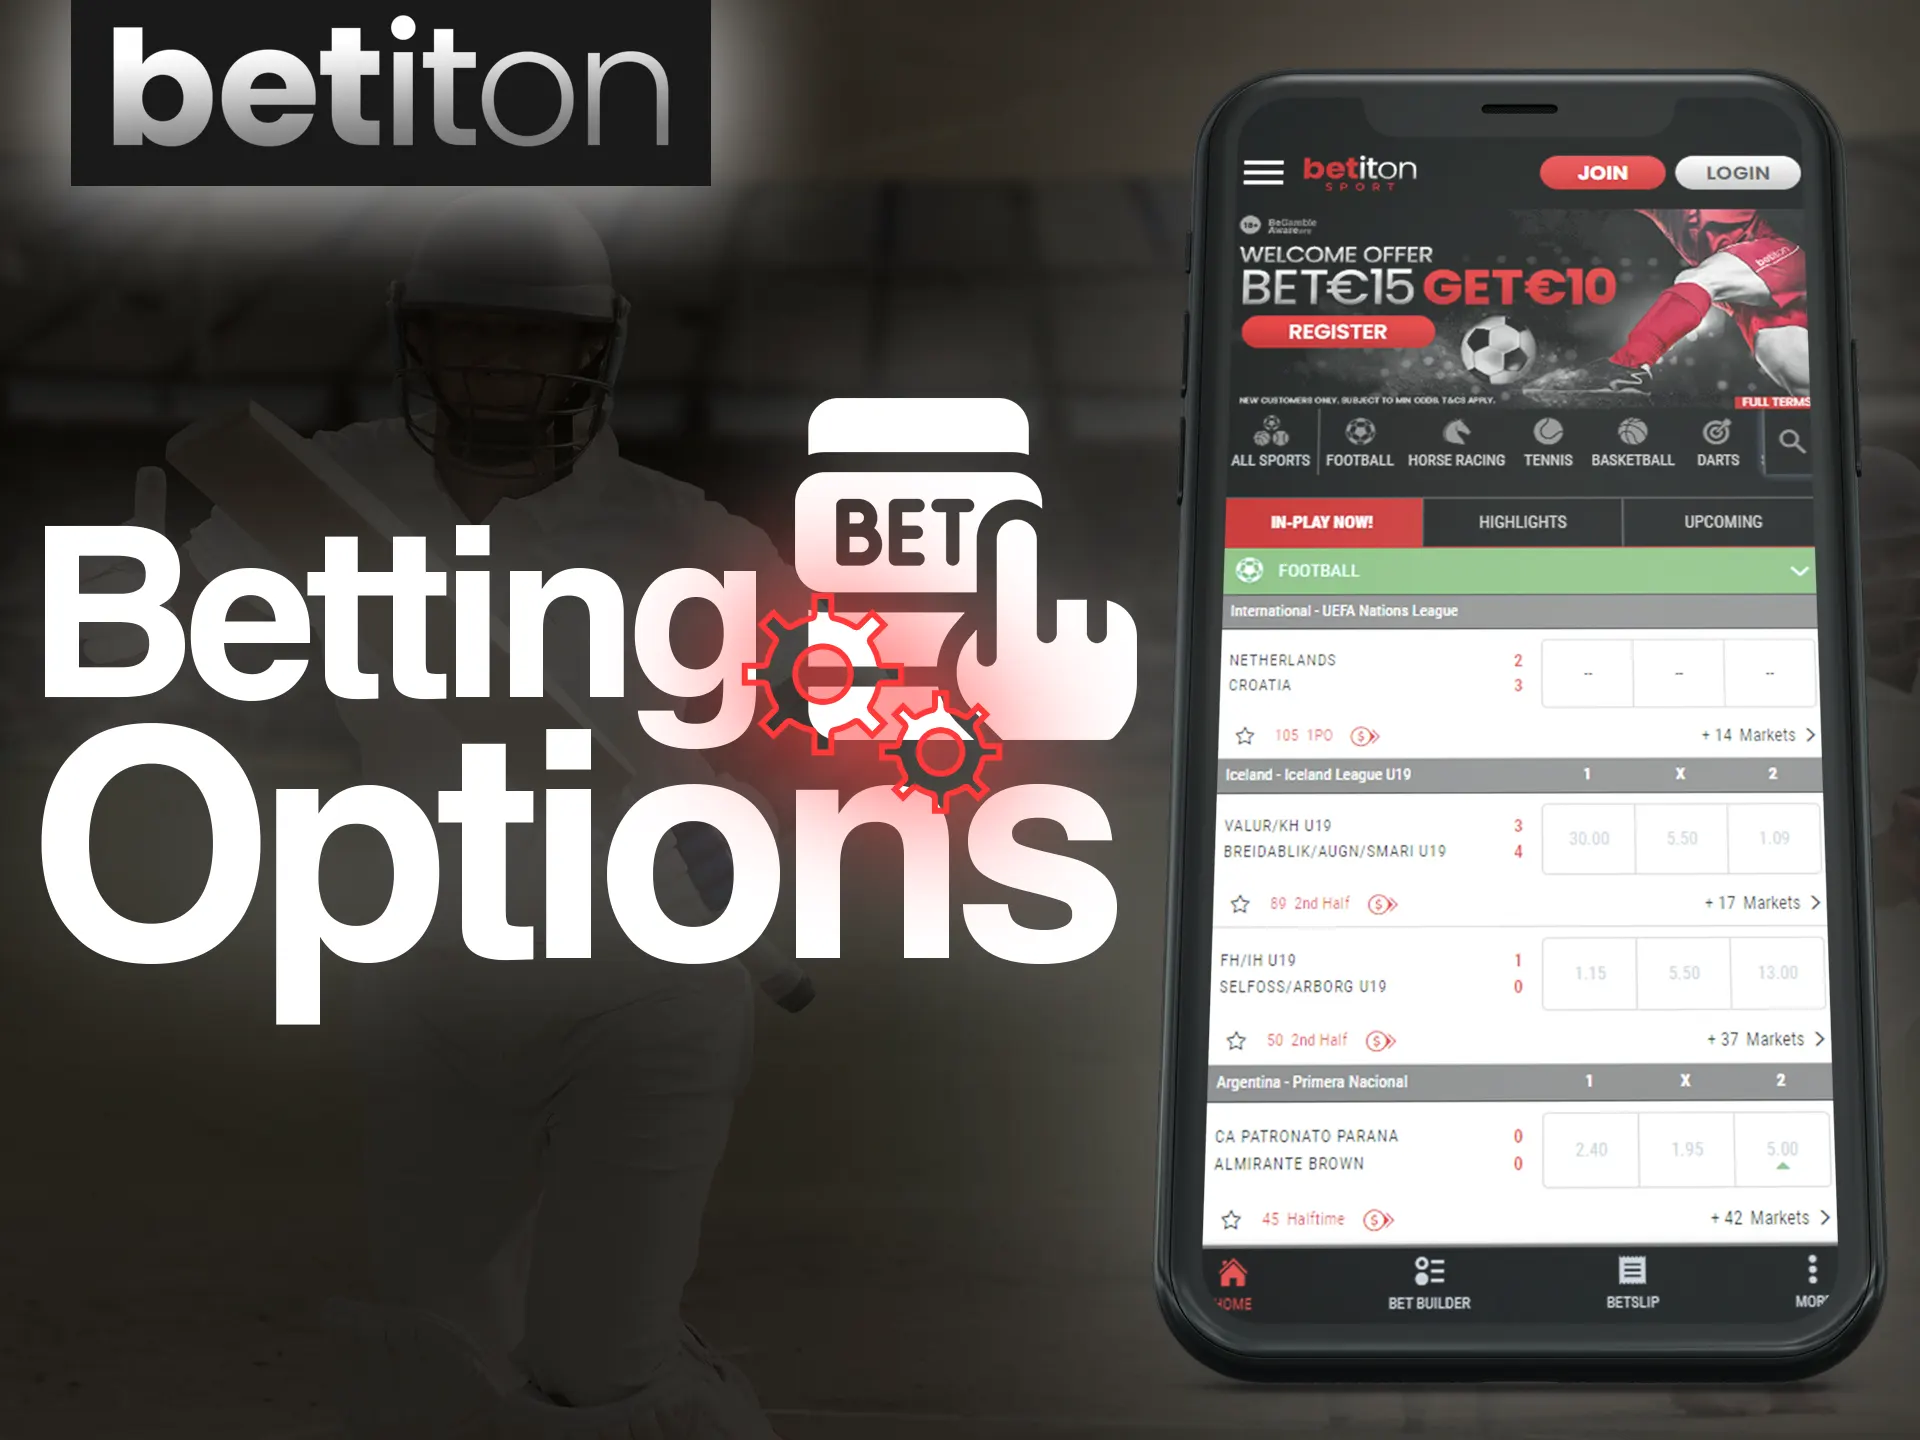 Bet as you want in the Betiton app.